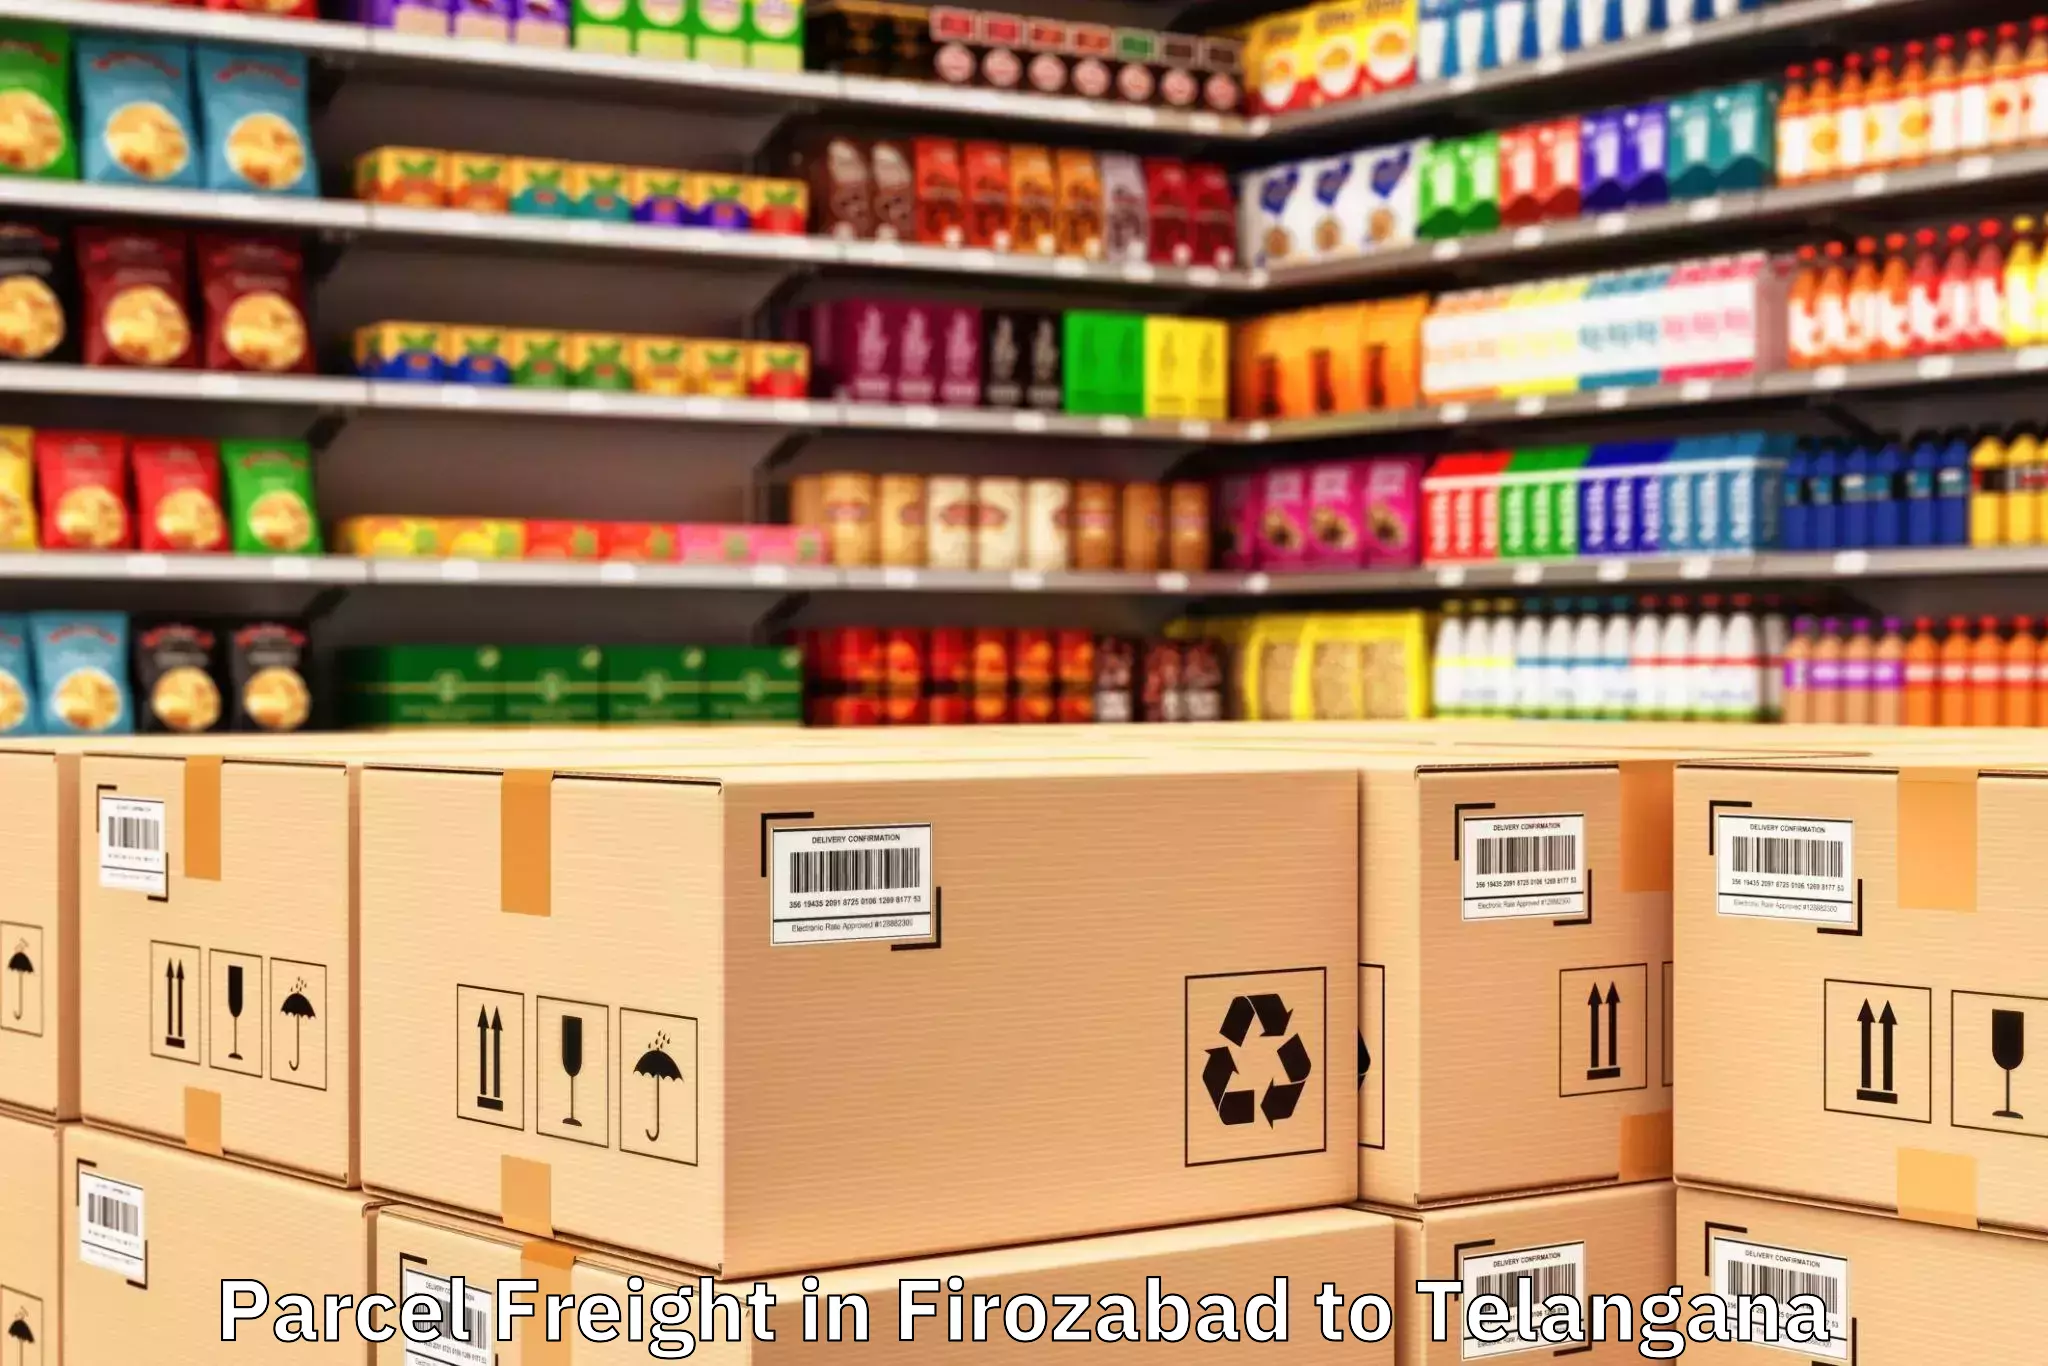 Affordable Firozabad to Bonakal Parcel Freight